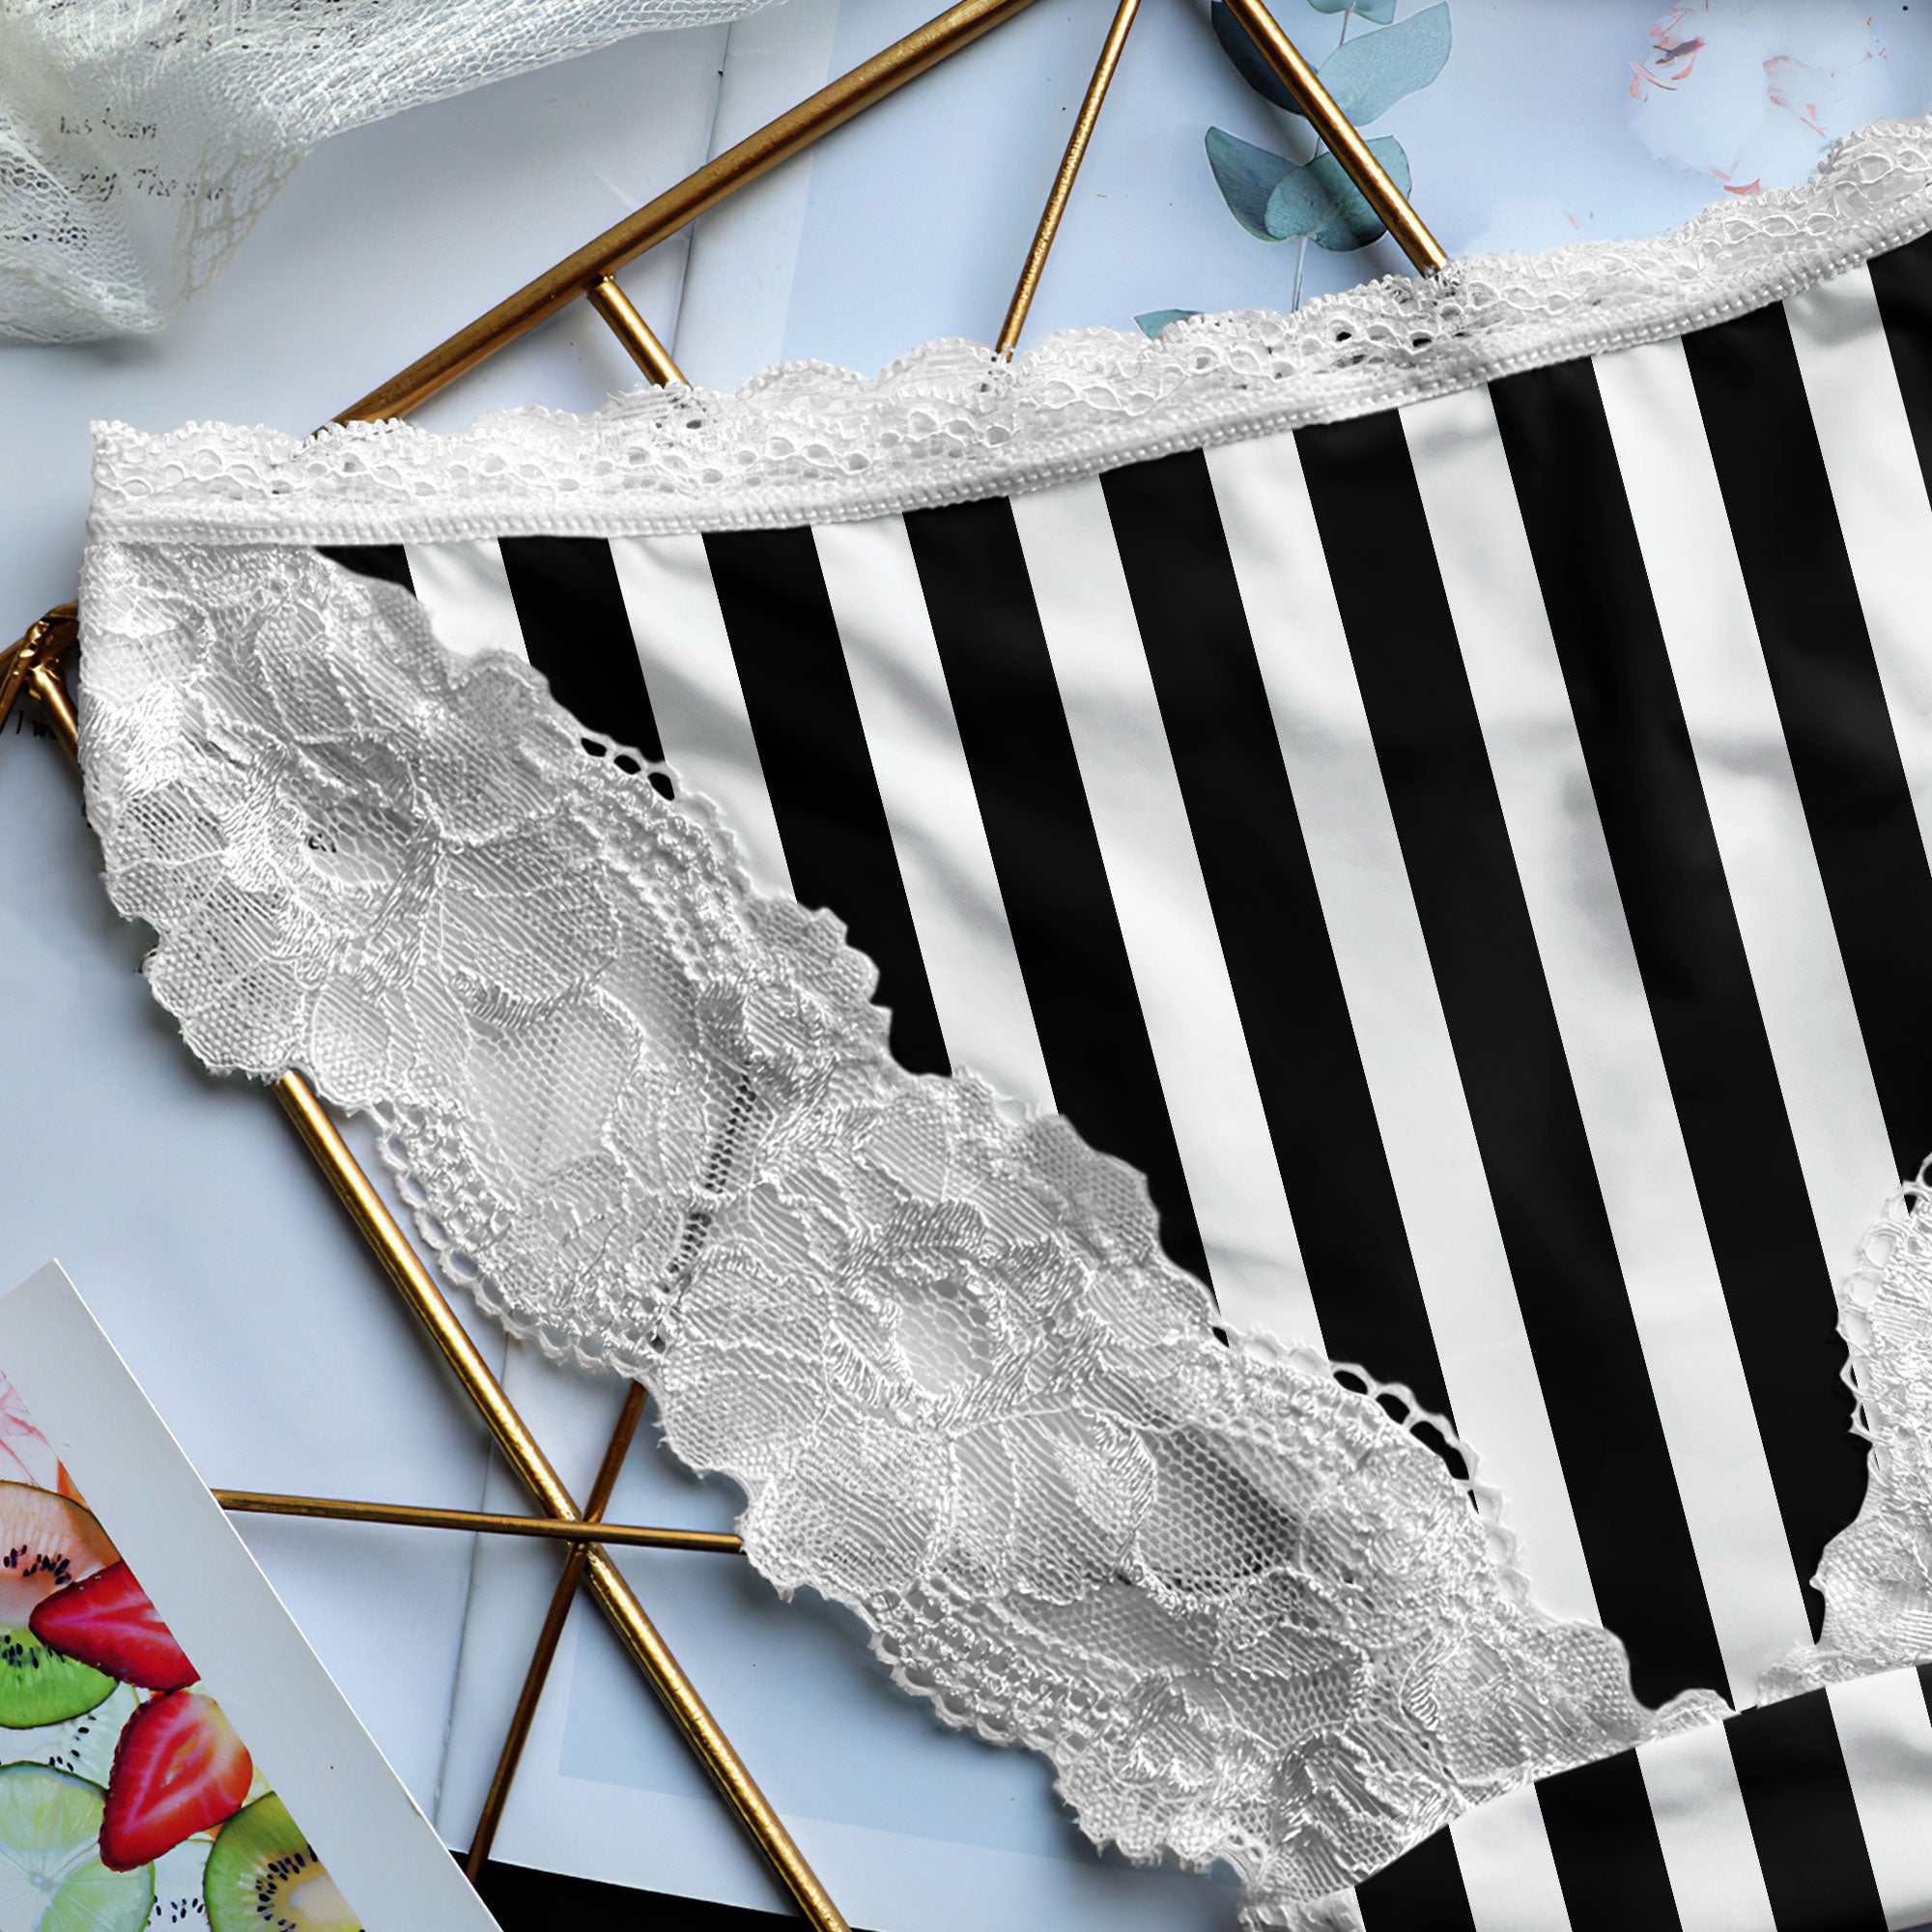 Charm your senses with our Funny & Chic lace panty collection.